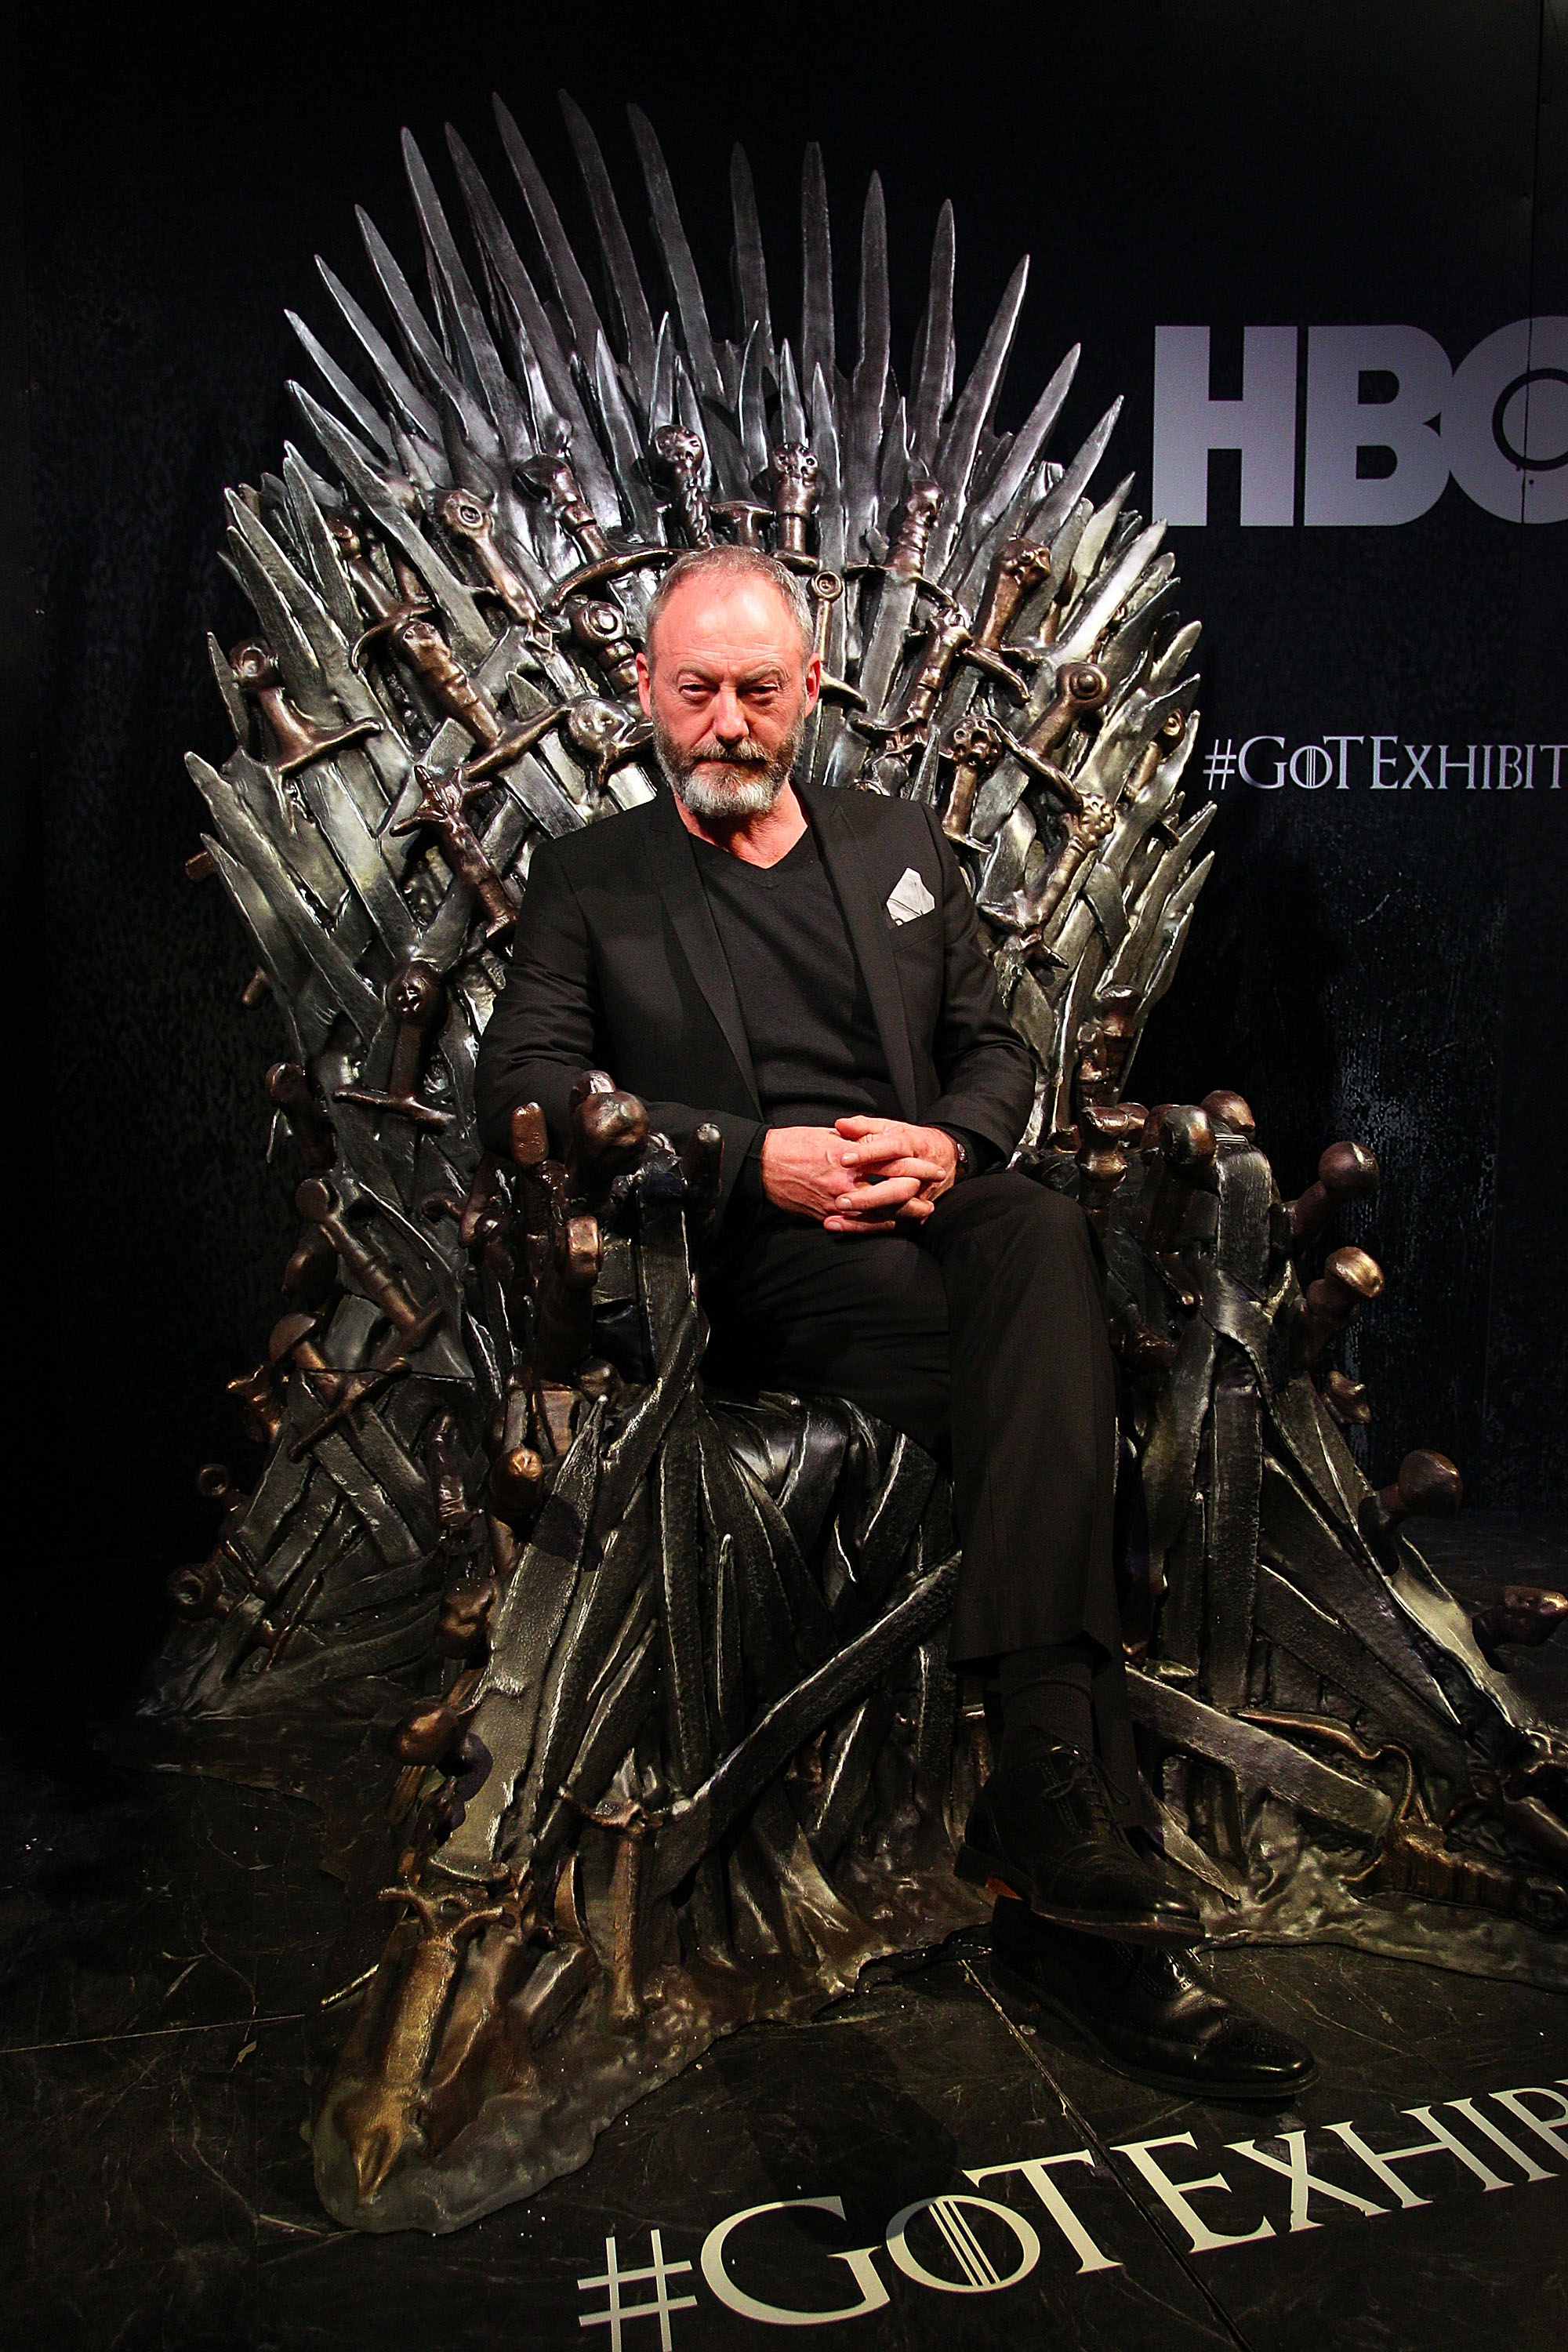 Actor Liam Cunningham at the launch of the 'Game of Thrones' Exhibition in Sydney, Australia on June 30, 2014.